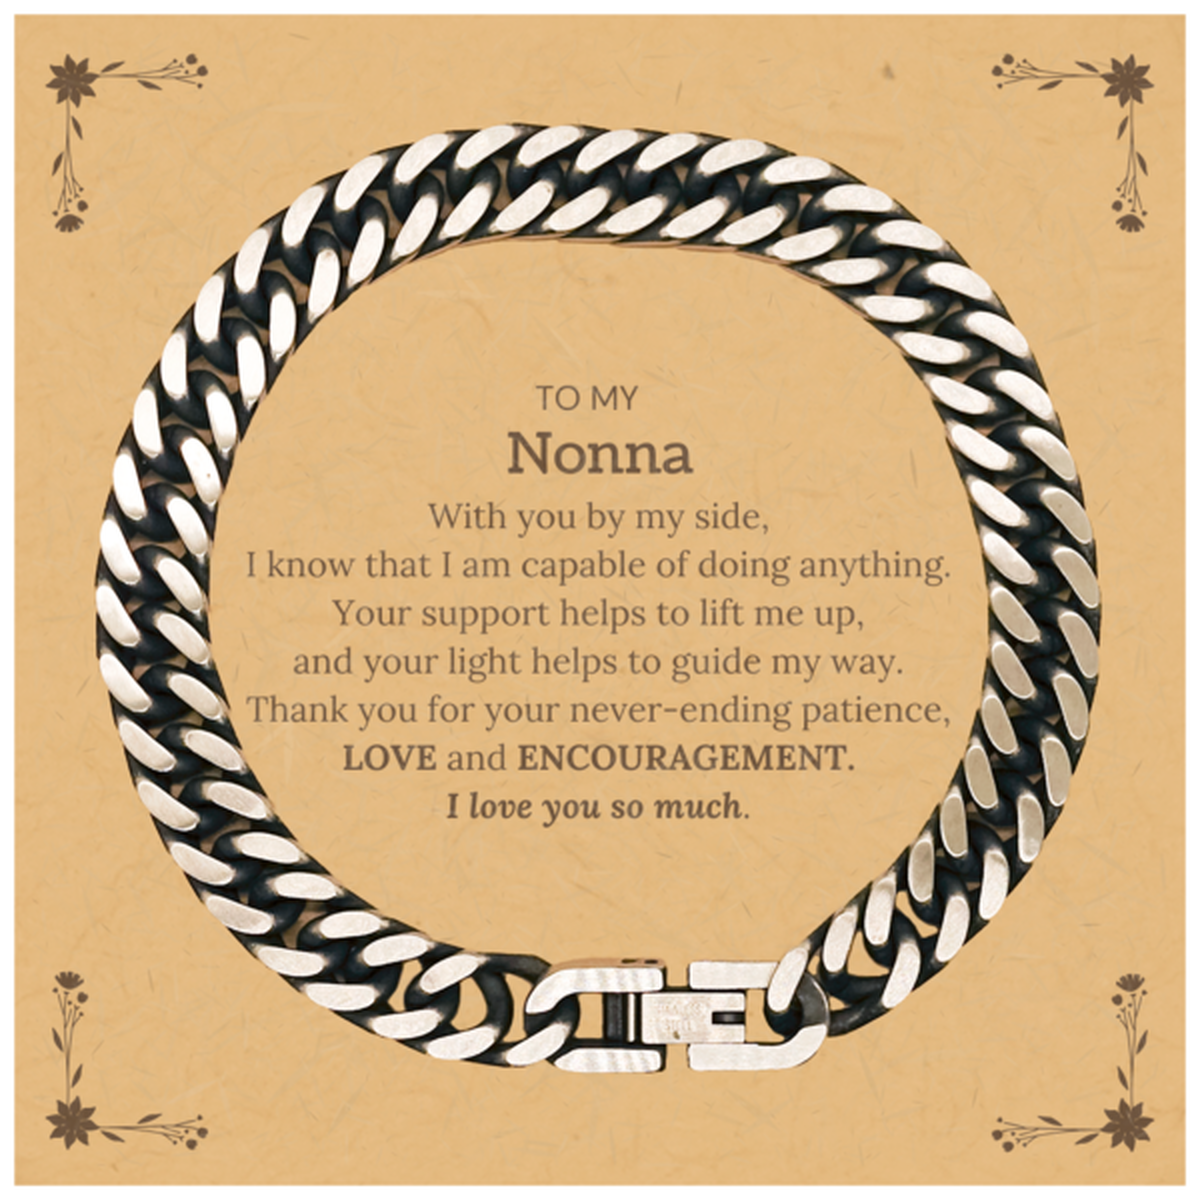 Appreciation Nonna Cuban Link Chain Bracelet Gifts, To My Nonna Birthday Christmas Wedding Keepsake Gifts for Nonna With you by my side, I know that I am capable of doing anything. I love you so much